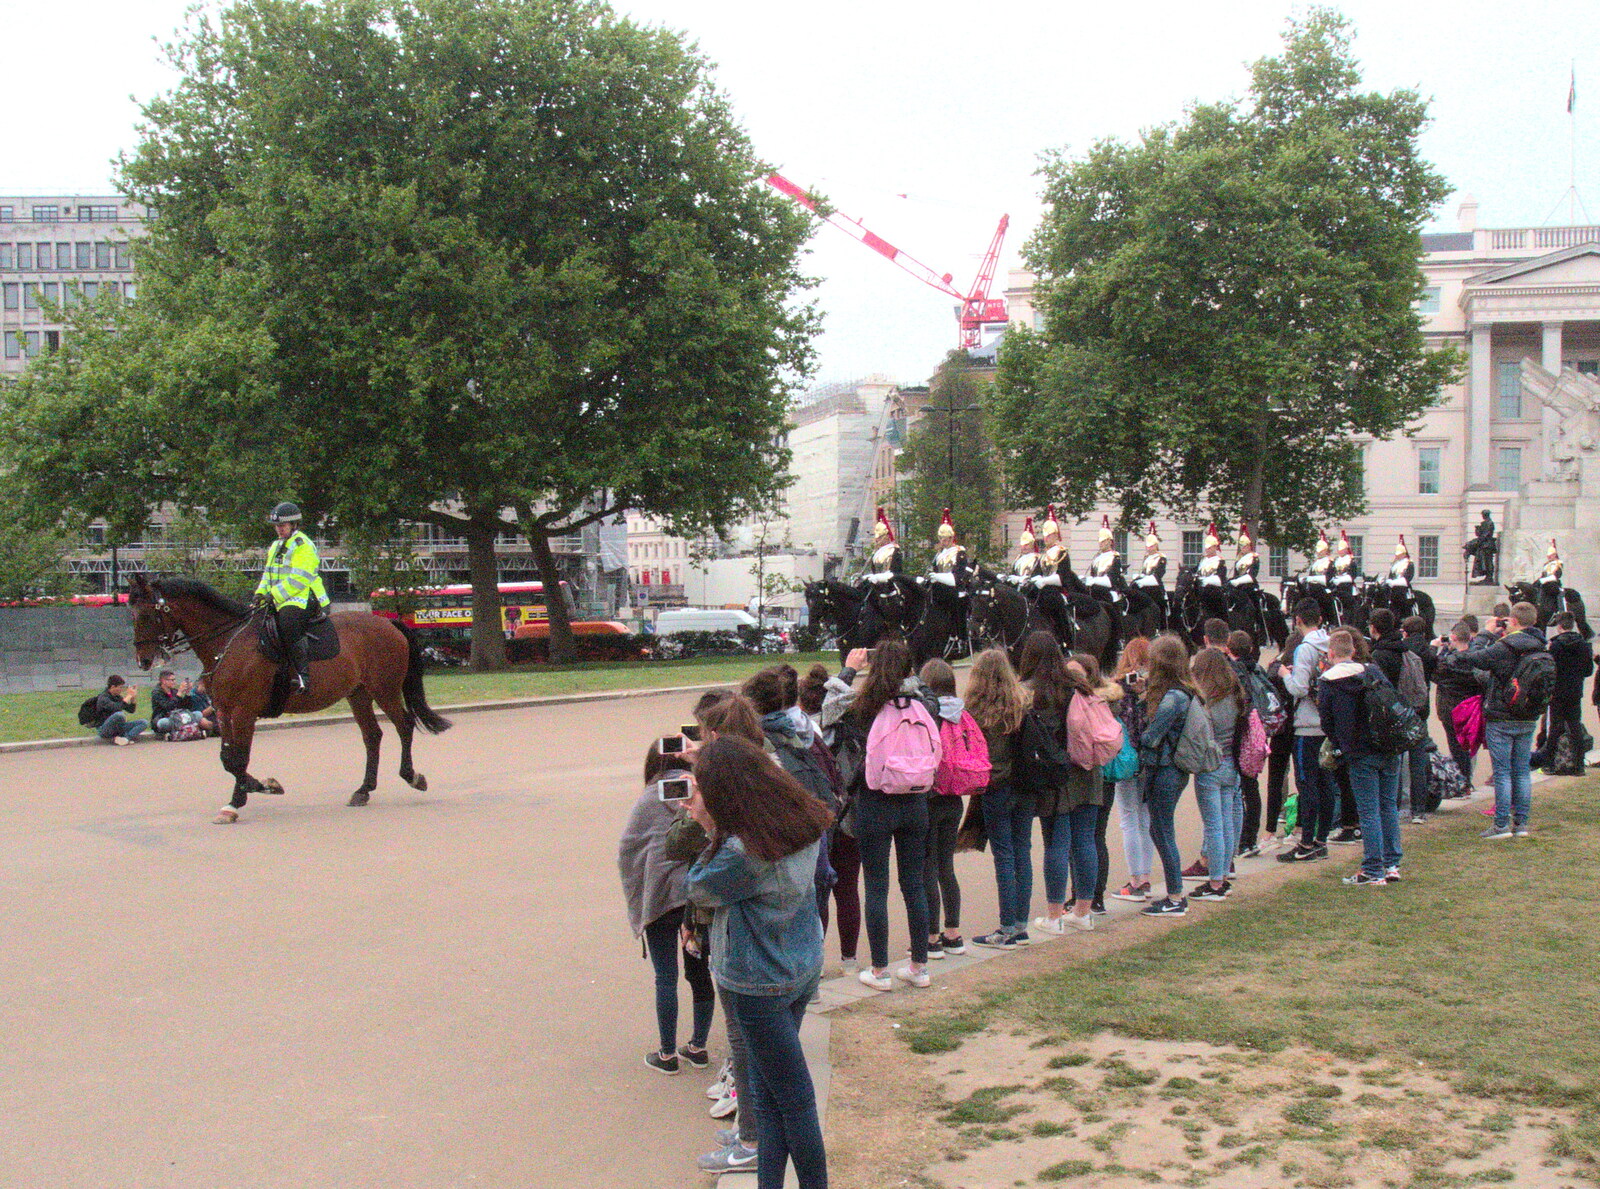 The Horseguards by the Wellington Arch from The Diss Organ Festival, Diss, Norfolk - 14th May 2017